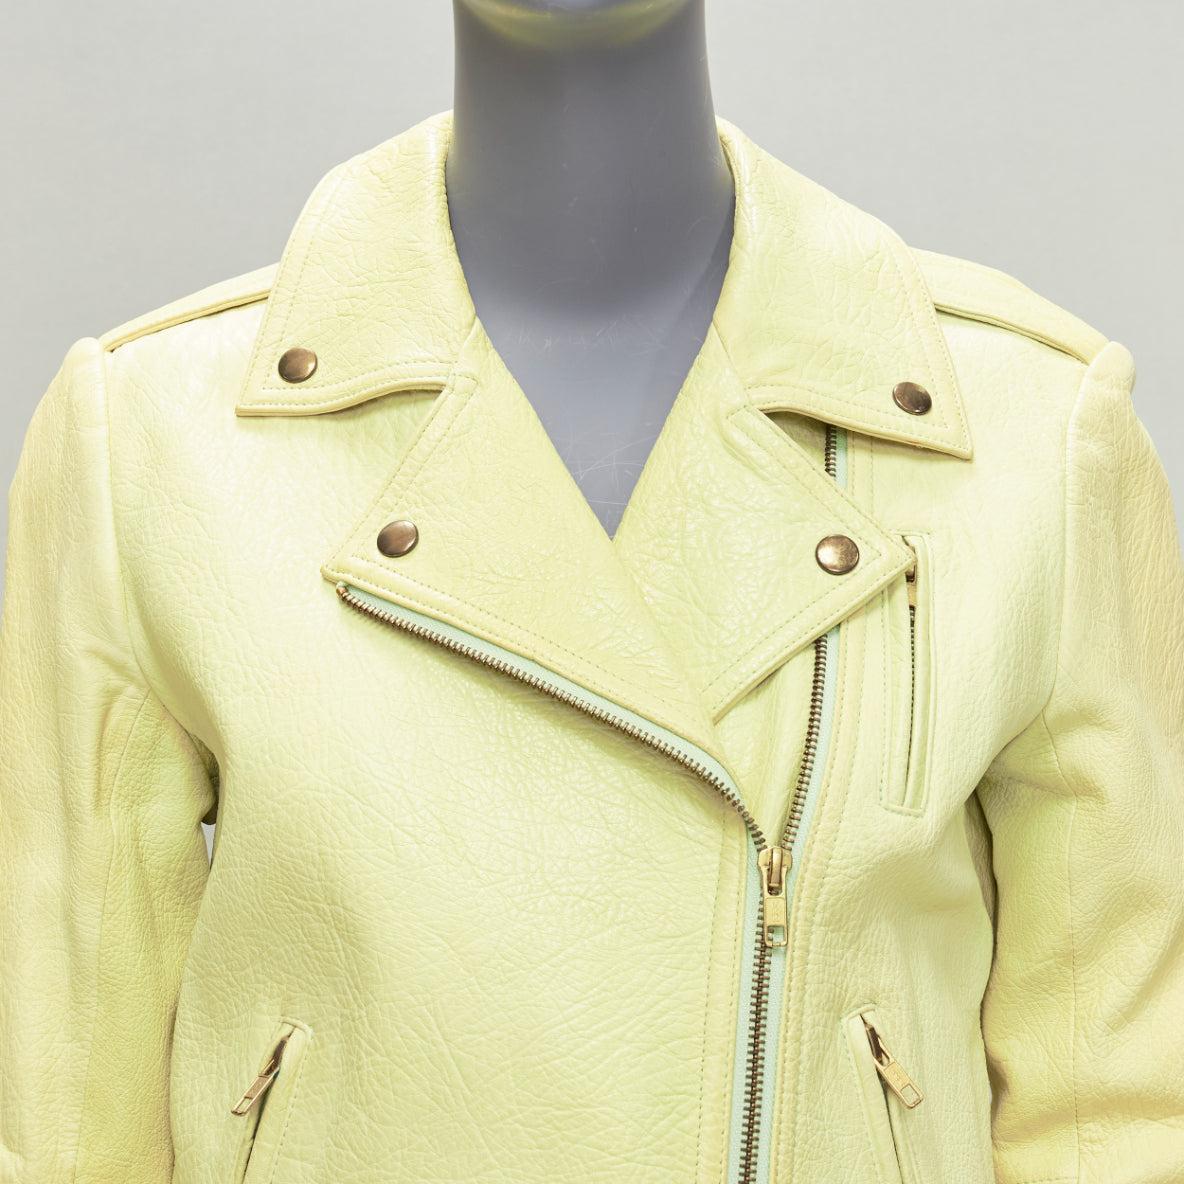 THEORY yellow lambskin leather motorcycle biker jacket M For Sale 3